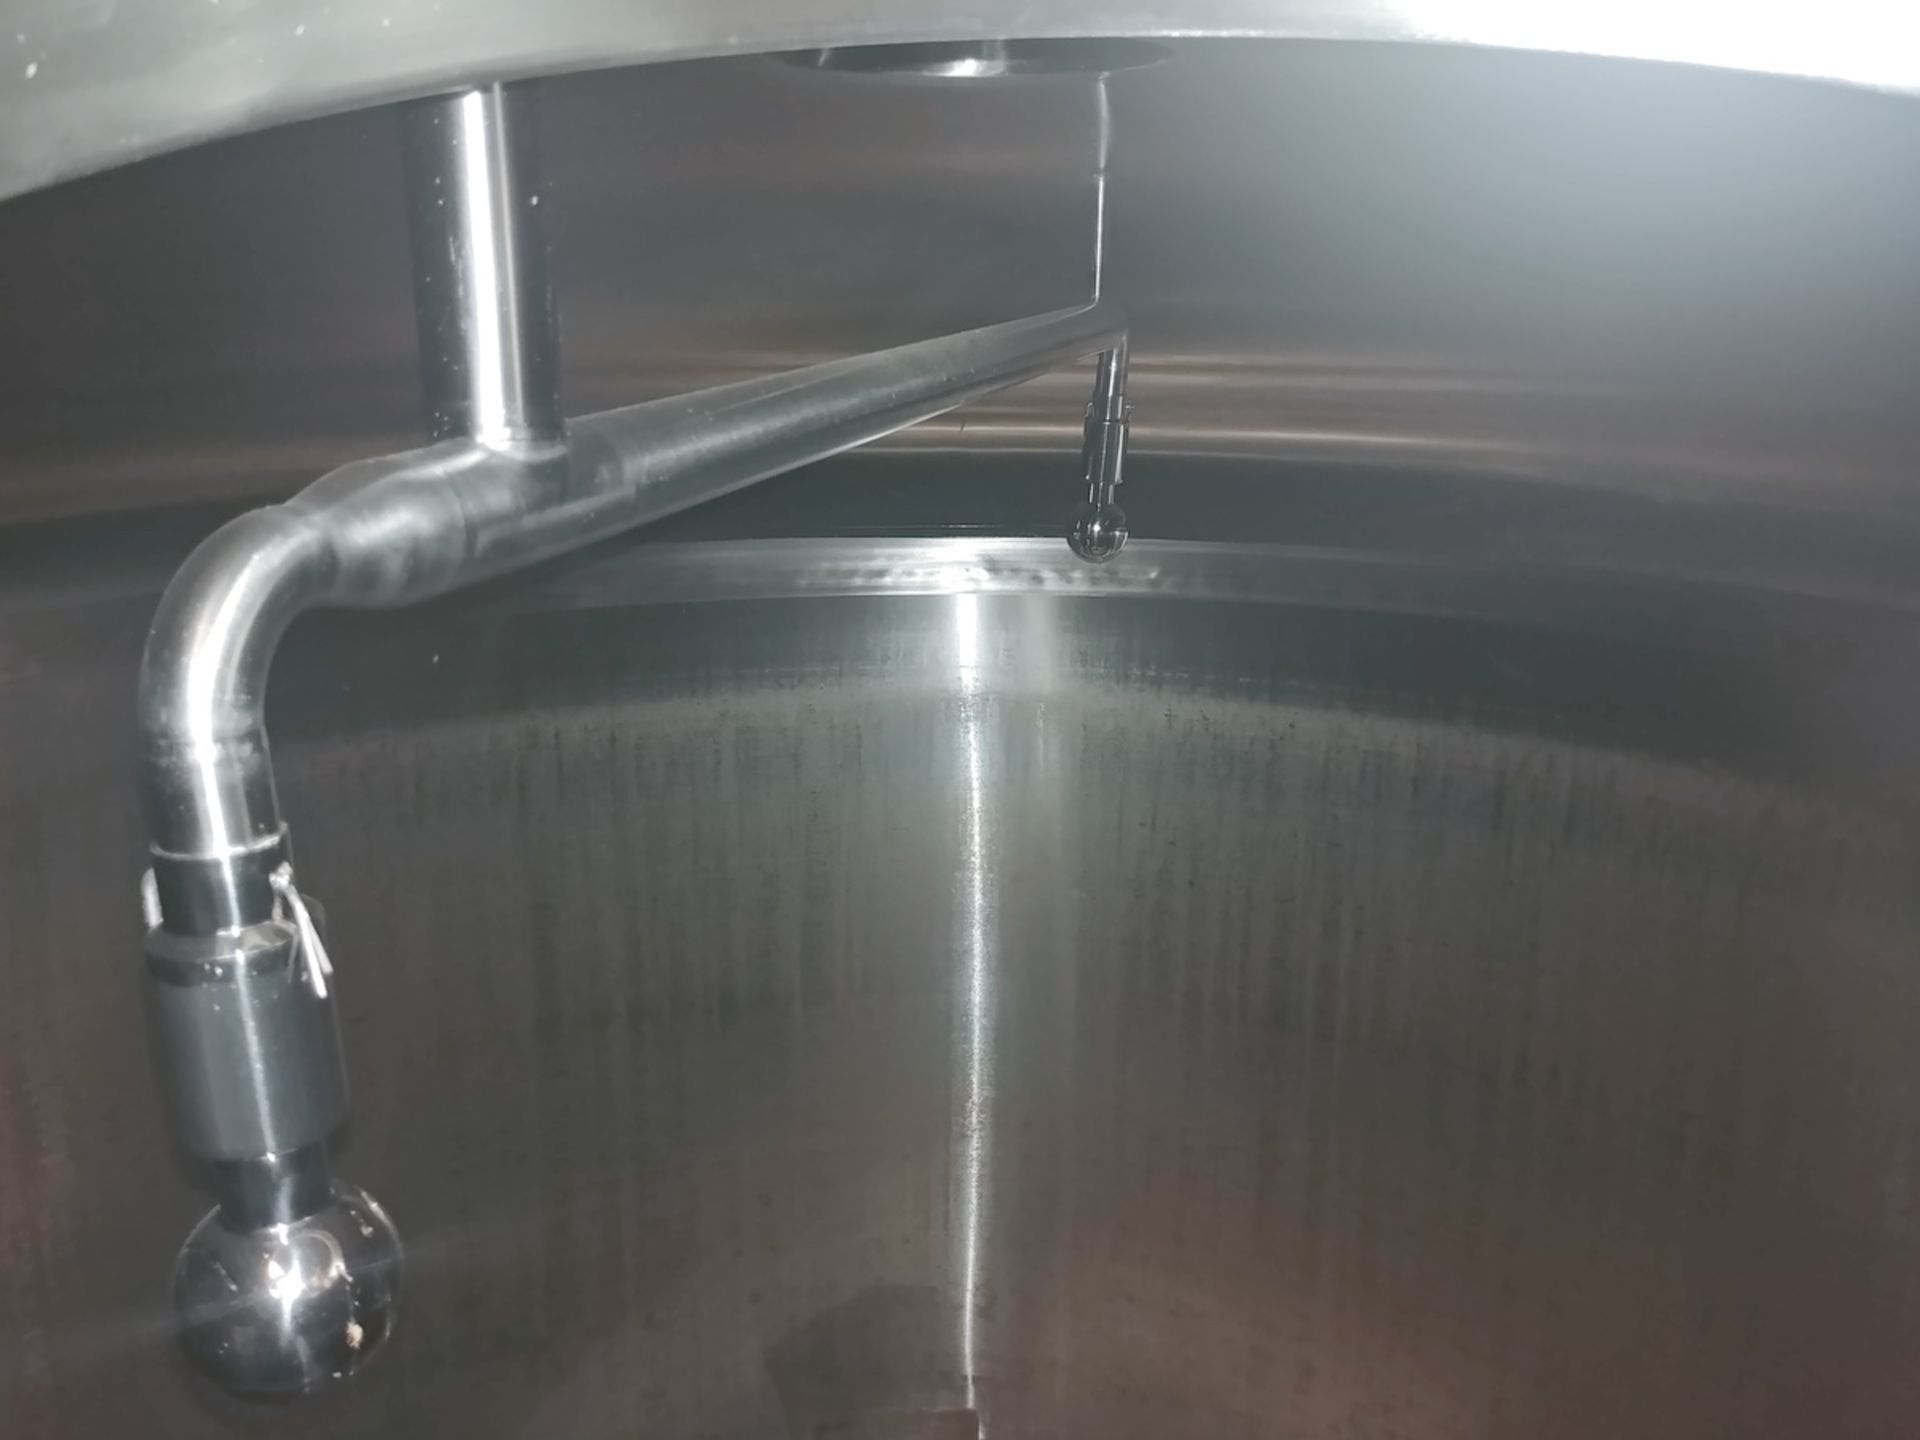 2013 Pacific Brewing 30 BBL 3-Vessel Brewhouse + Hot Liquor Tank - Sub to Bulk | Reqd Rig Fee: $6500 - Image 22 of 31